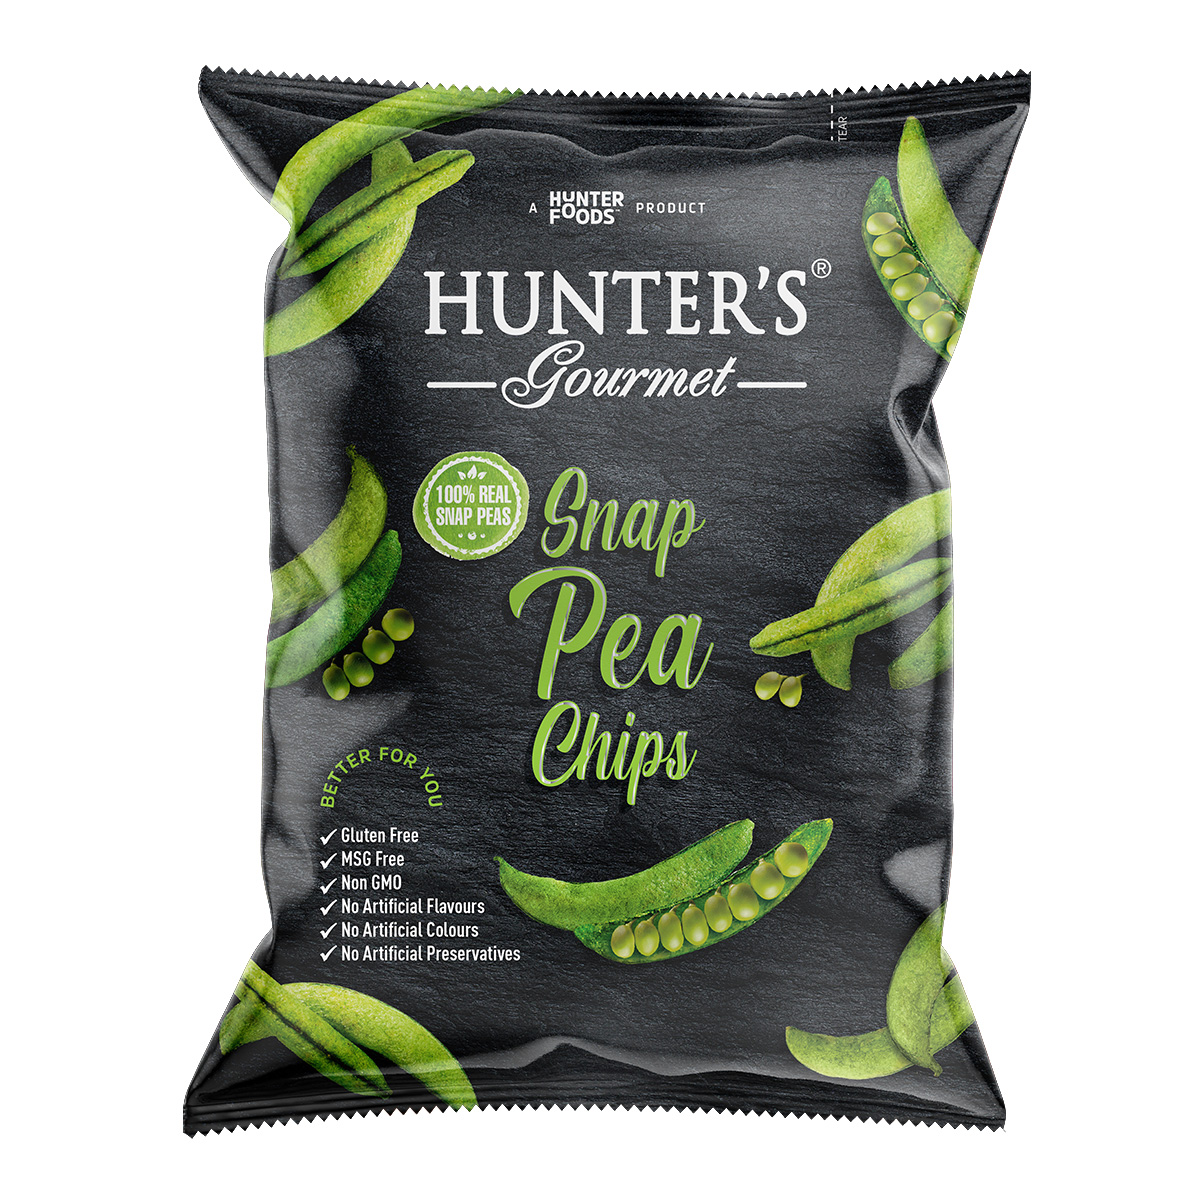 Hunter’s Gourmet Mixed Vegetable Chips (75gm)